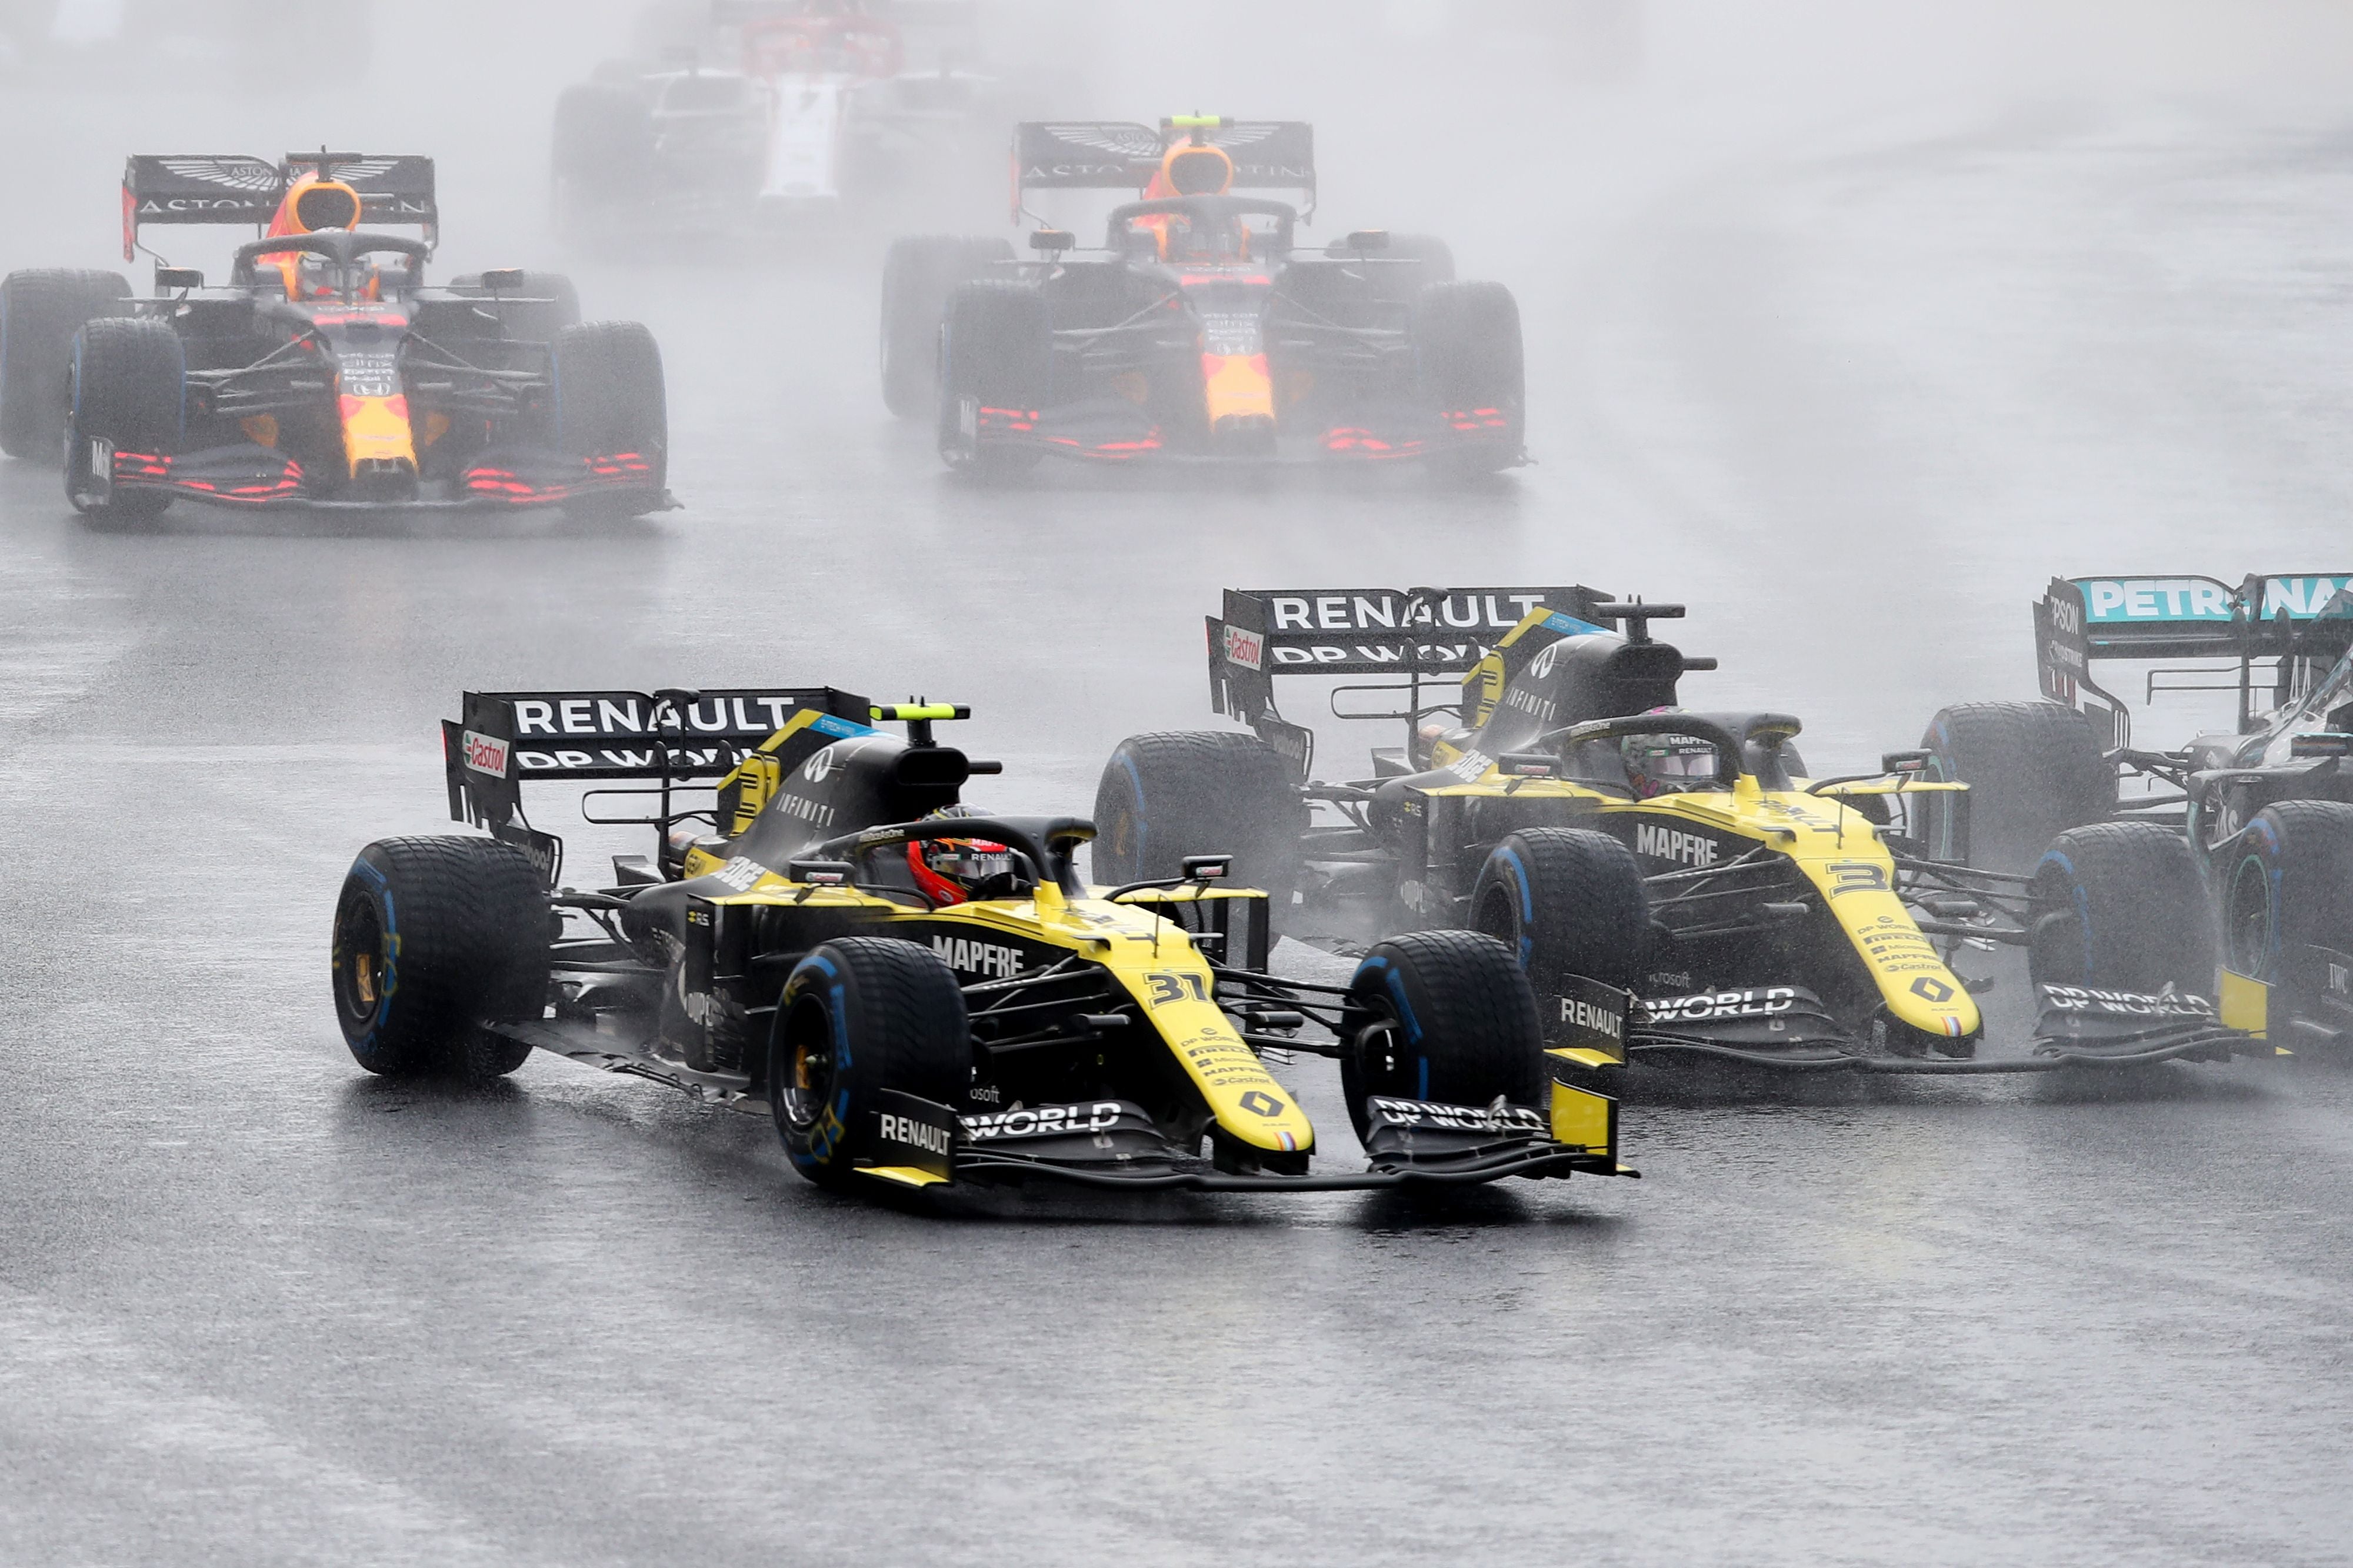 The two Renault drivers came together at Turn One as Ricciardo tapped Ocon into a spin